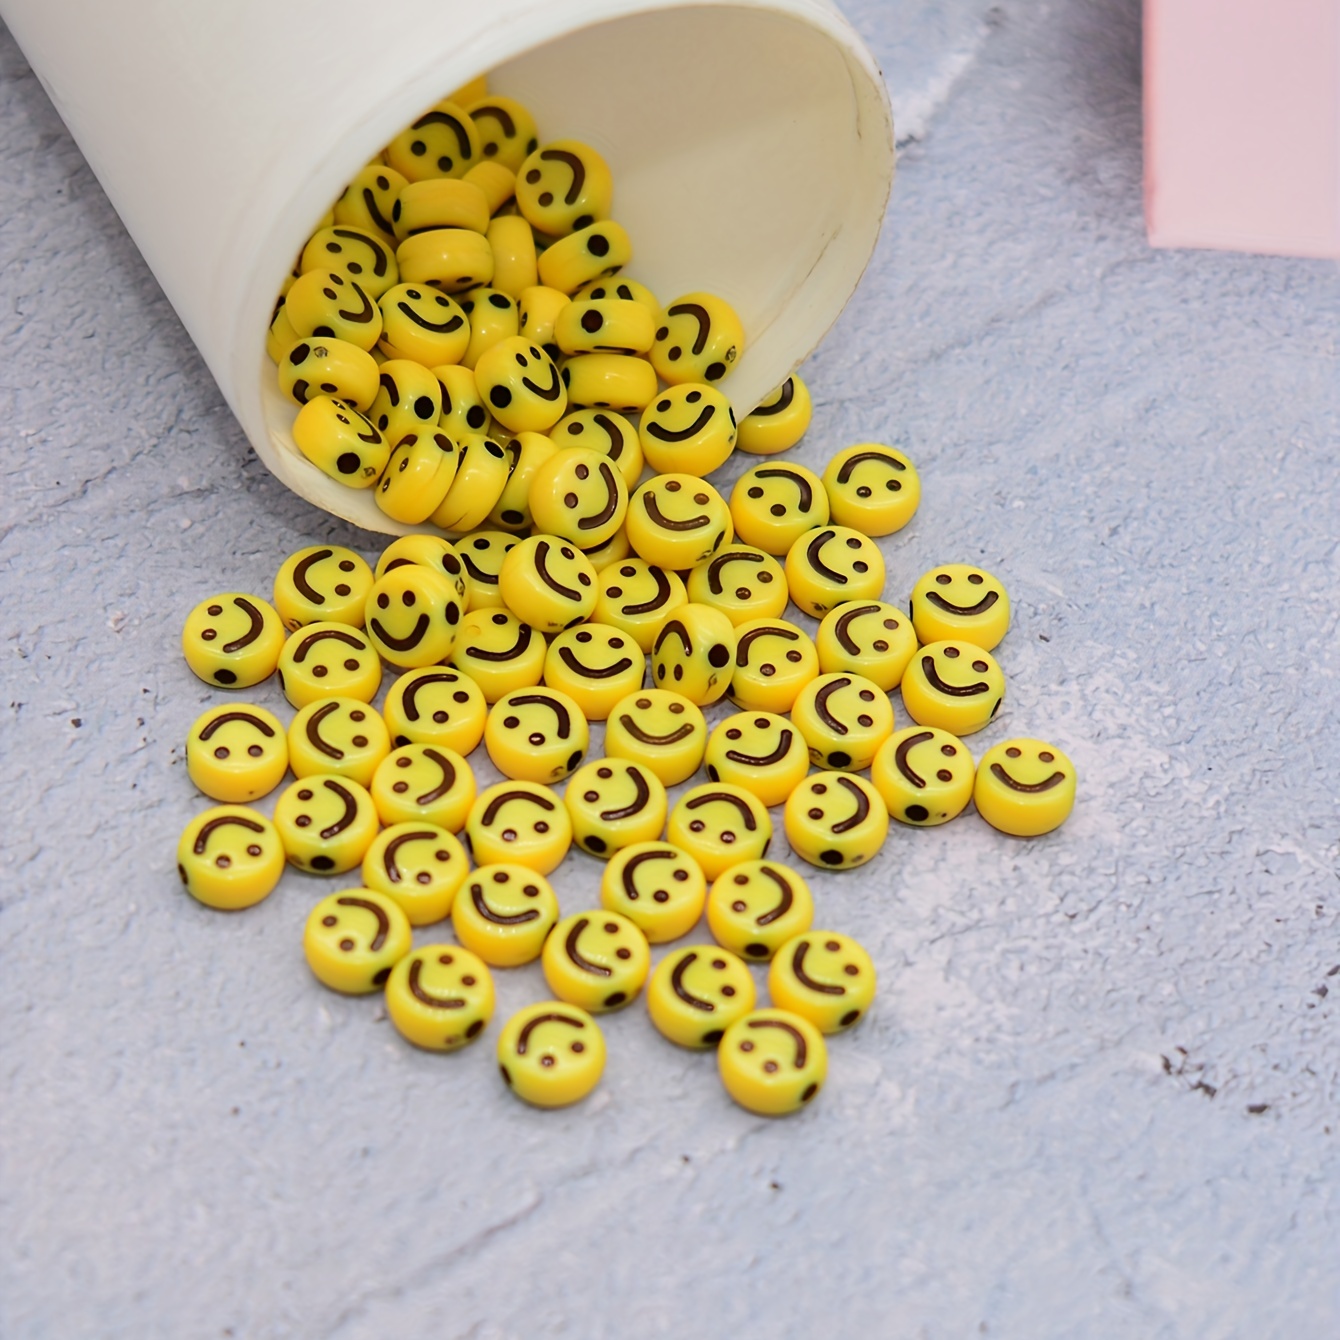 Smiley Face Round Beads, Emoji Beads, Happy Face Beads, Plastic